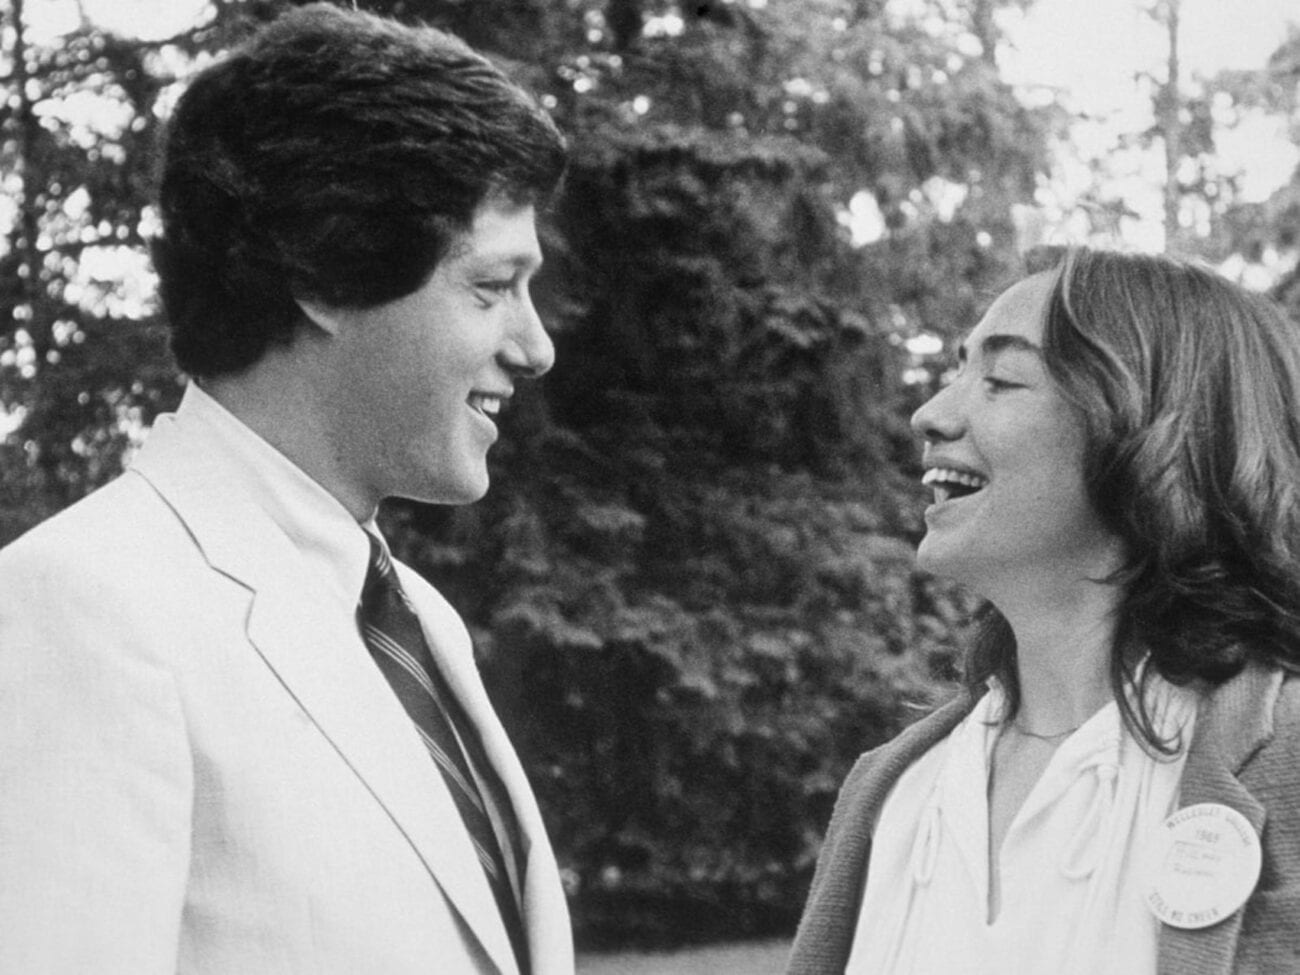 'Rodham' explores who would young Hillary Clinton have become and what that would have meant for the US. Find out more here.